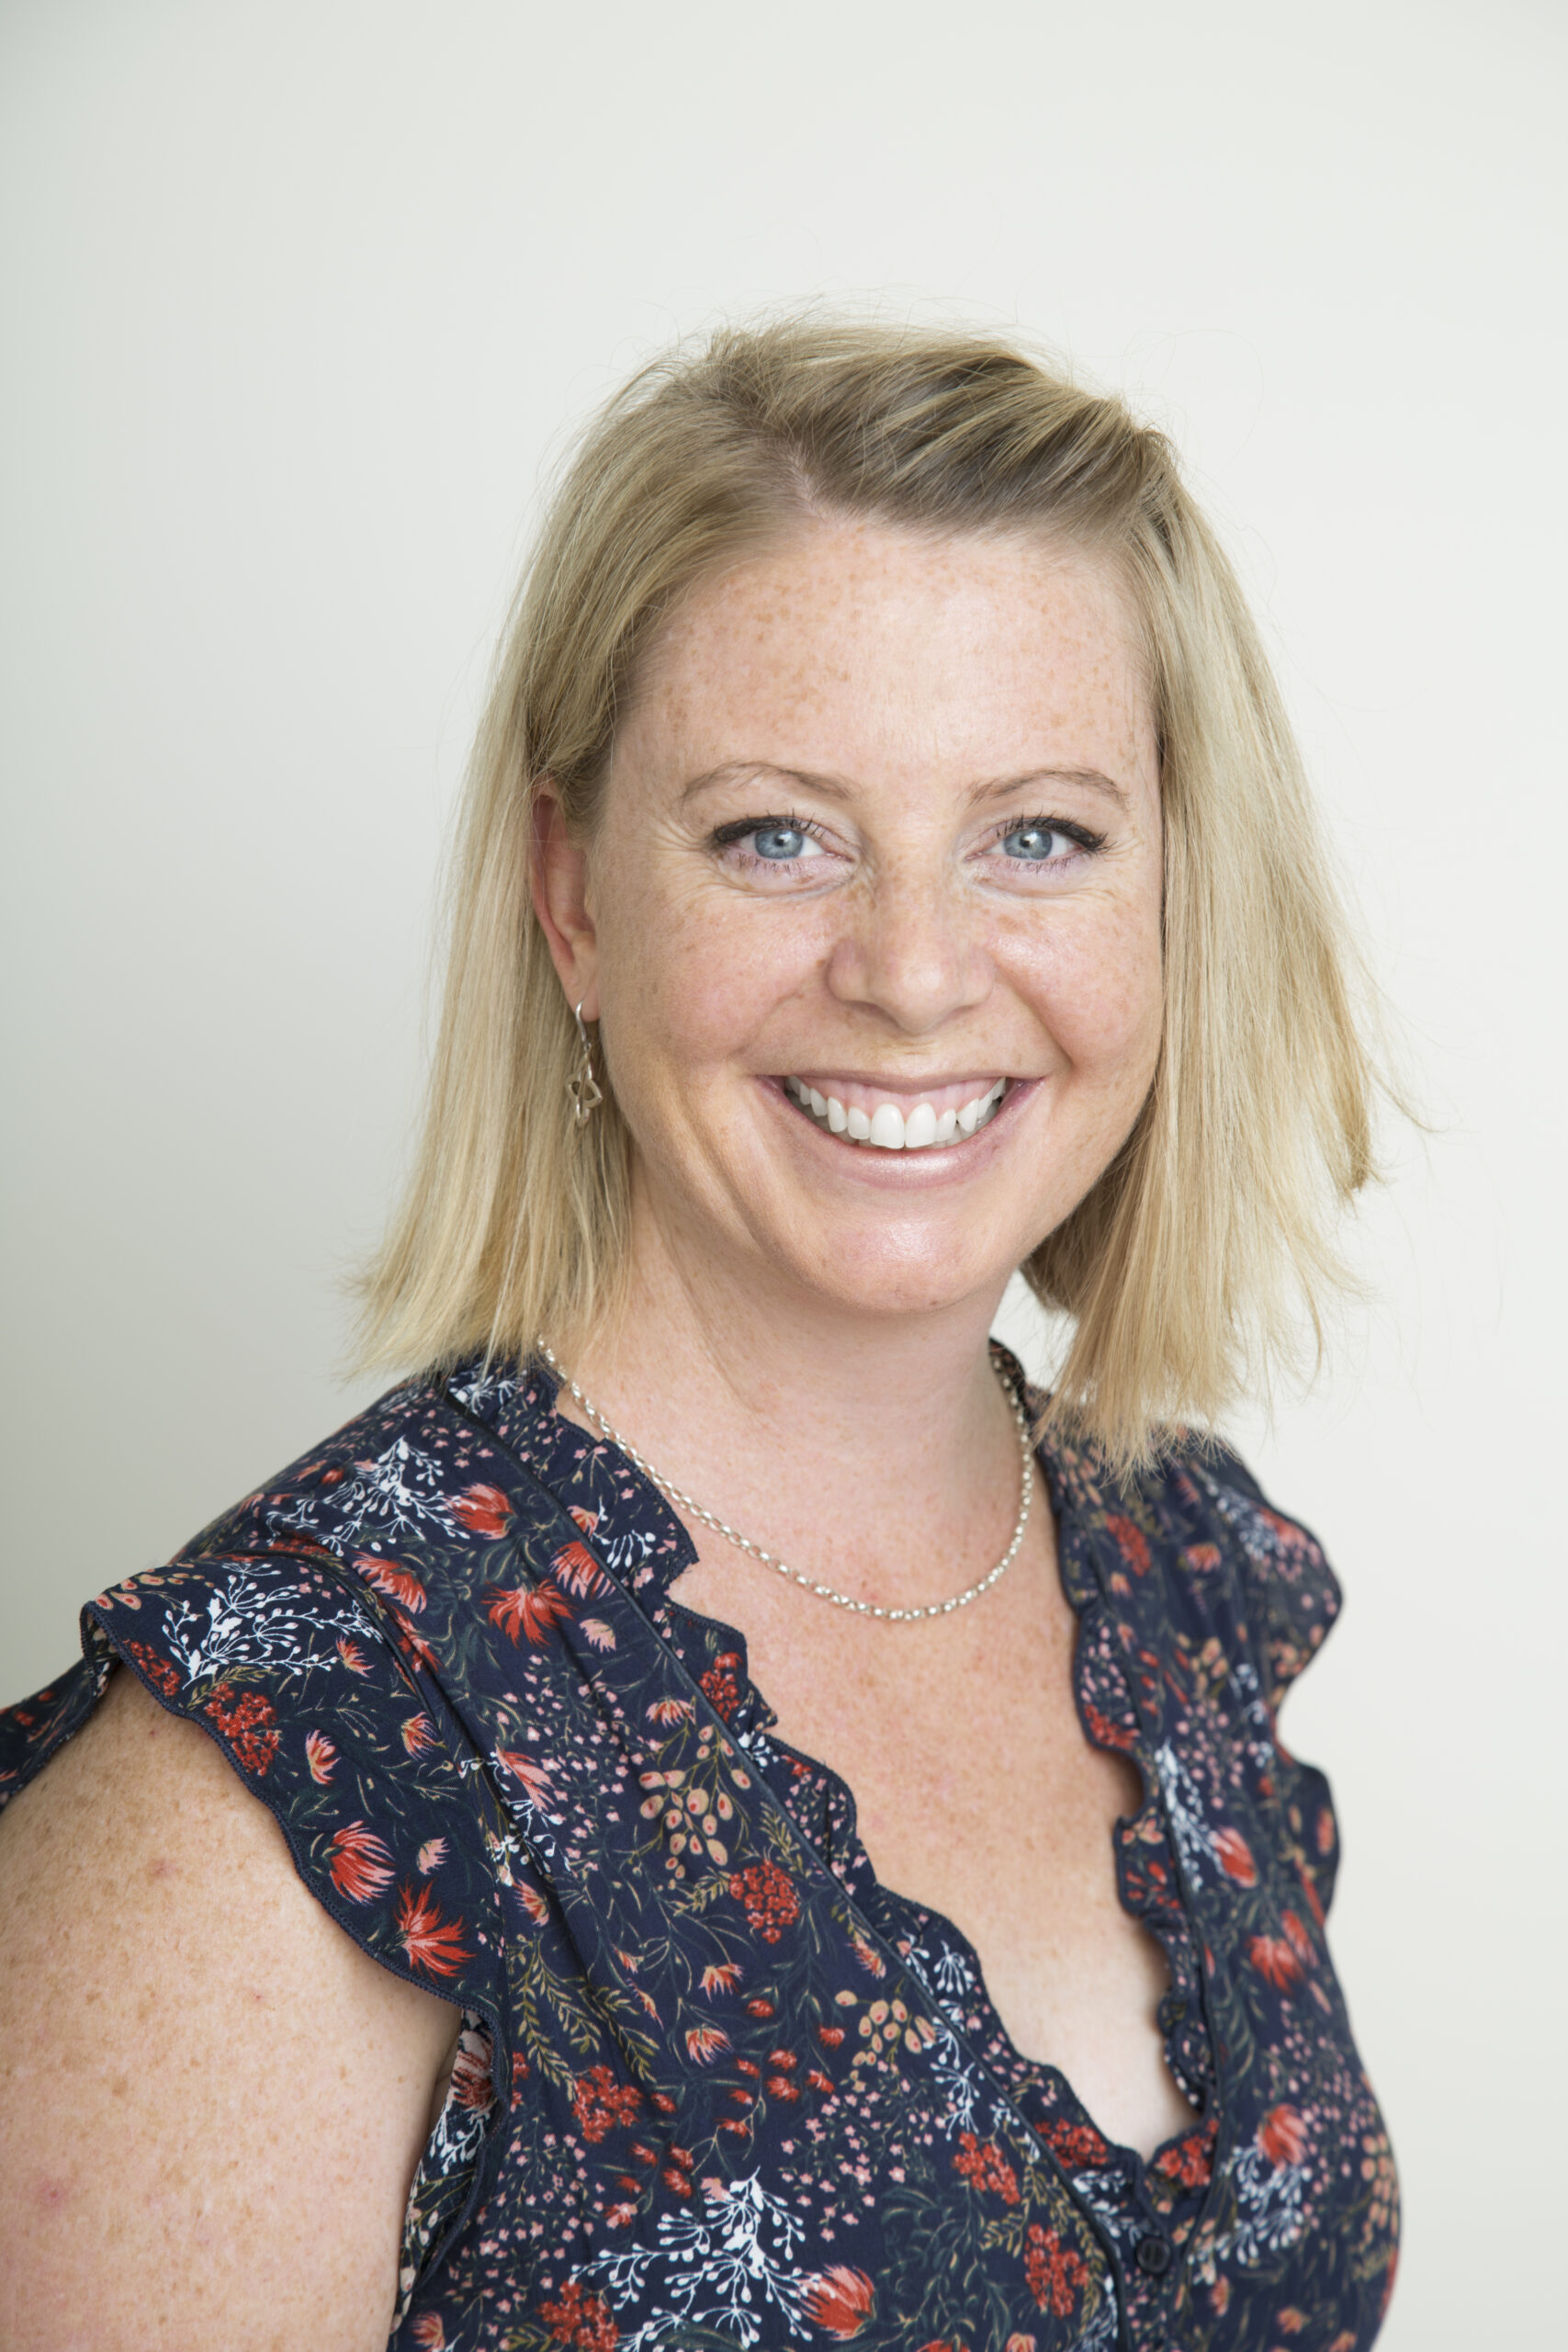 A photo of Kirsty smiling with bright blue eyes, wearing a navy blue floral top.